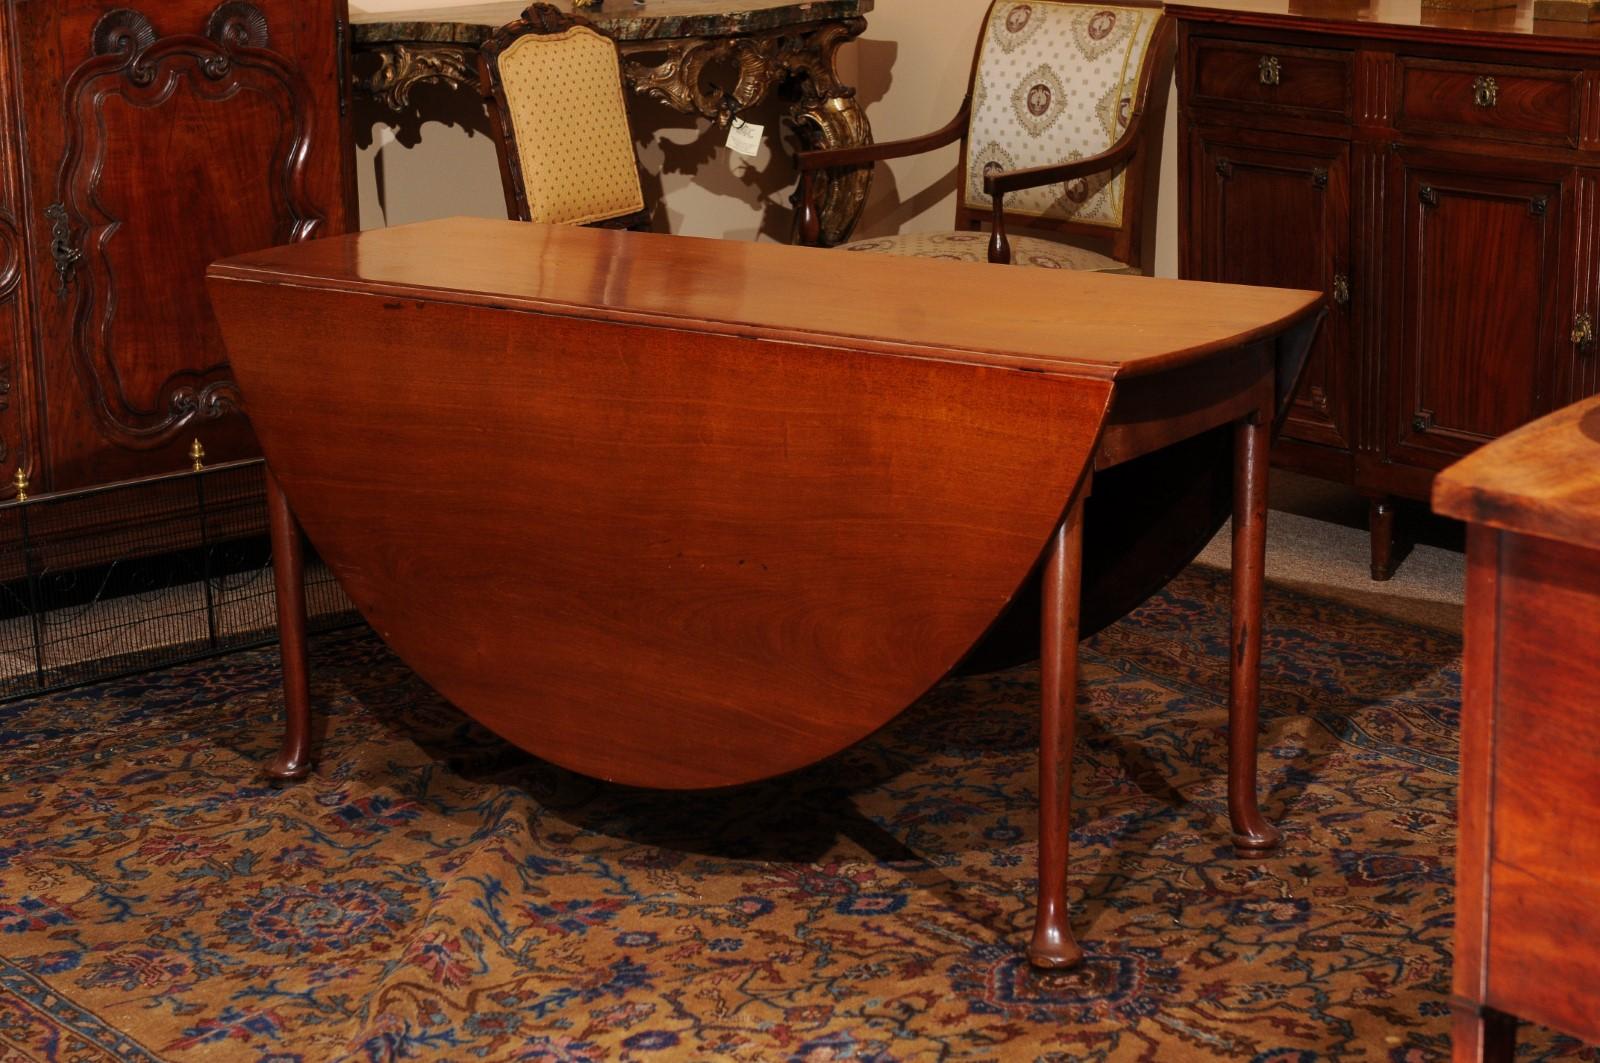  Mid-18th C English George II Mahogany Drop Leaf Oval Dining Table with Pad Feet (Table de salle à manger ovale à feuilles tombantes et pieds pad) en vente 5